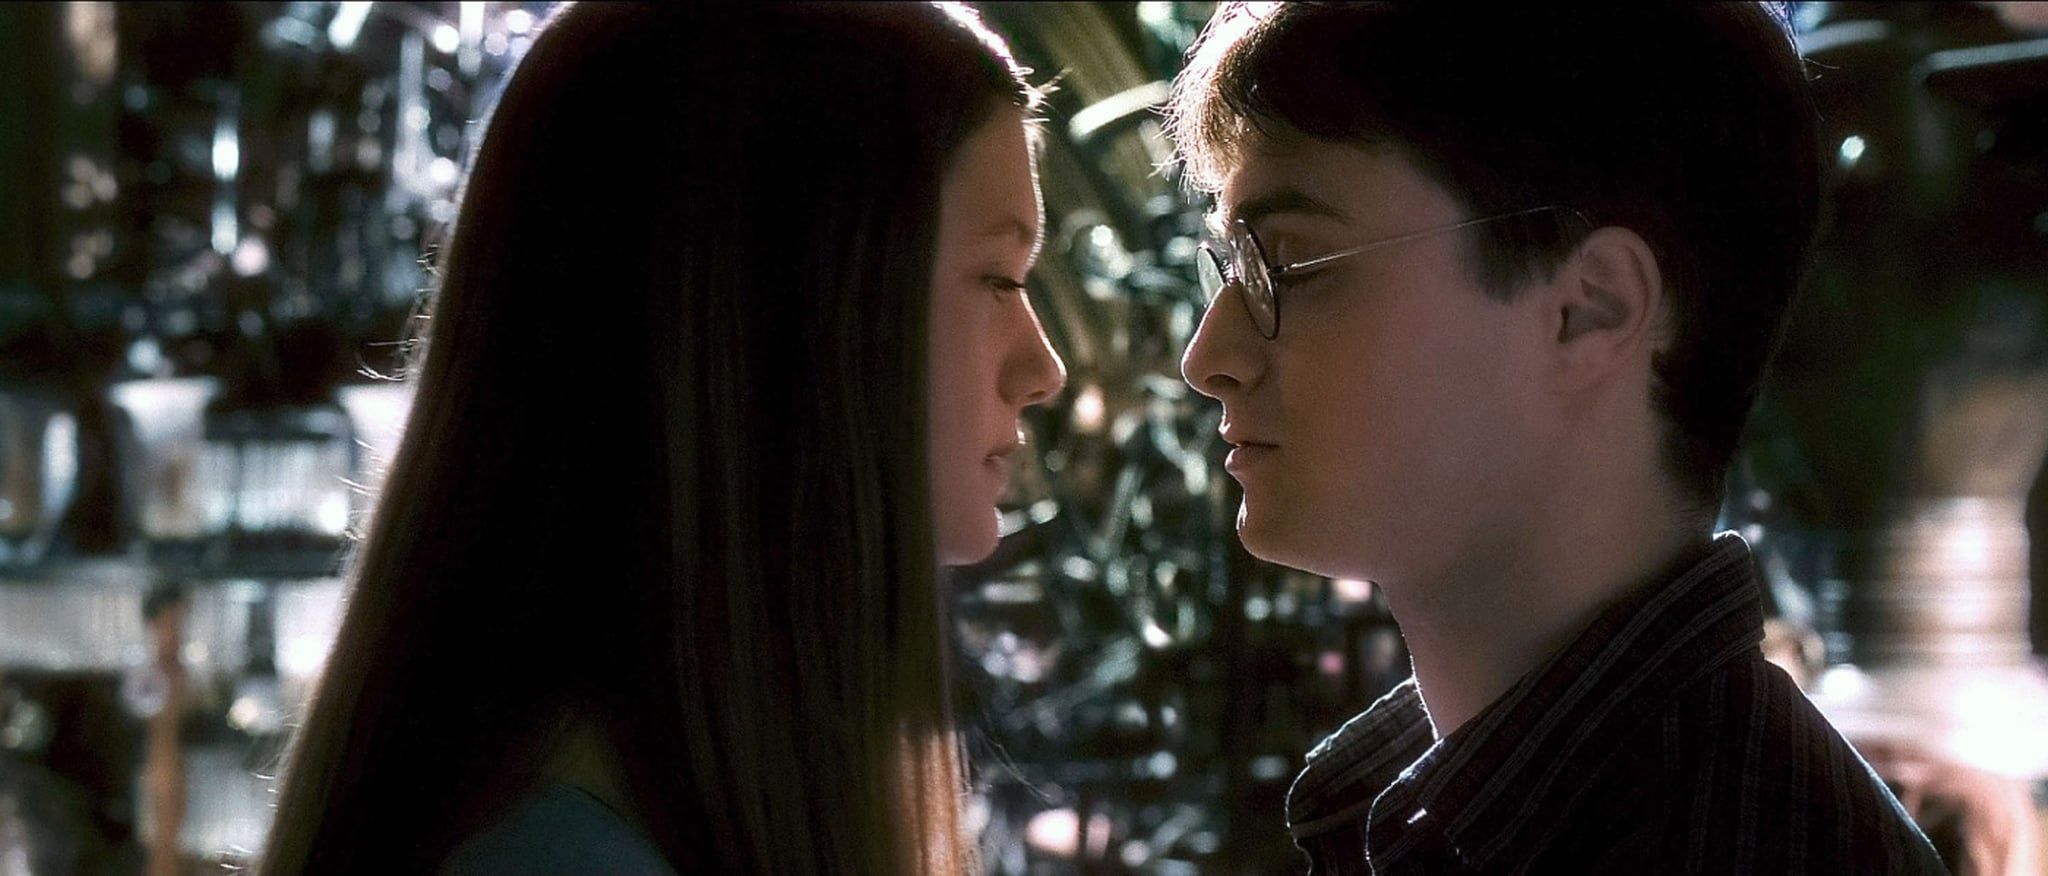 Harry Potter 10 Things In The HalfBlood Prince Movie That Only Make Sense If You Read The Books